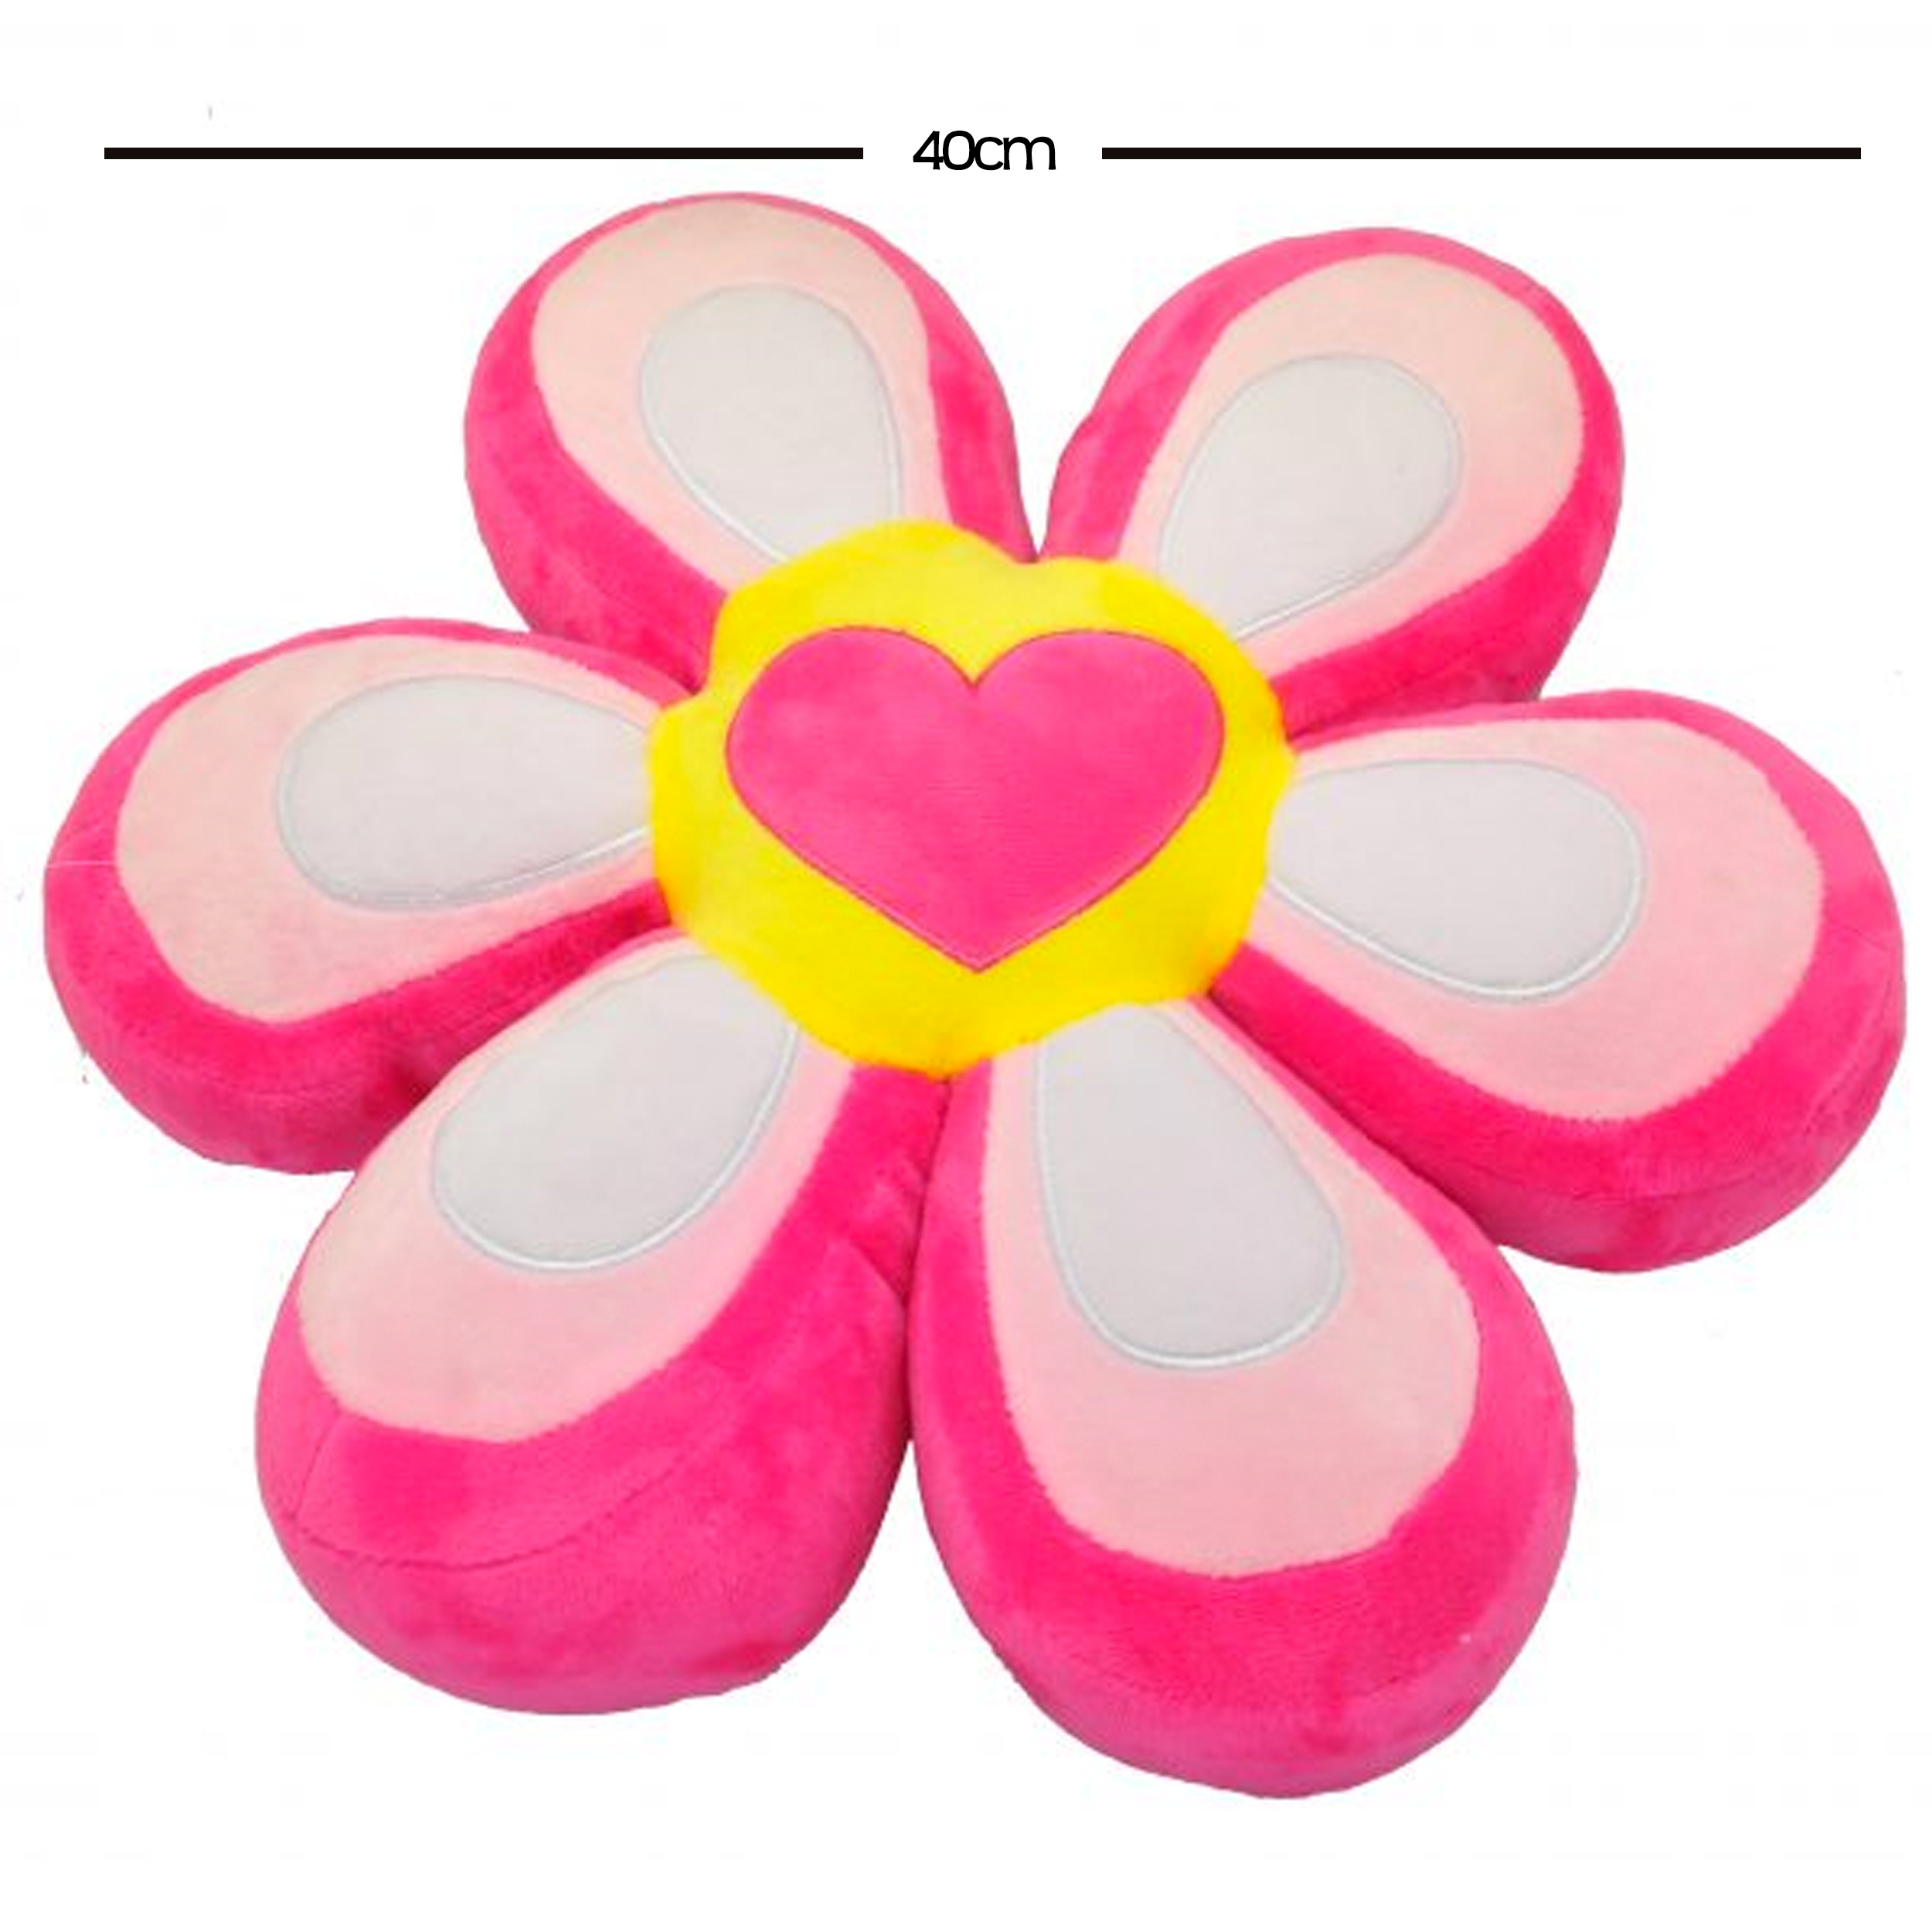 Flower_Cushion_With_Measurement